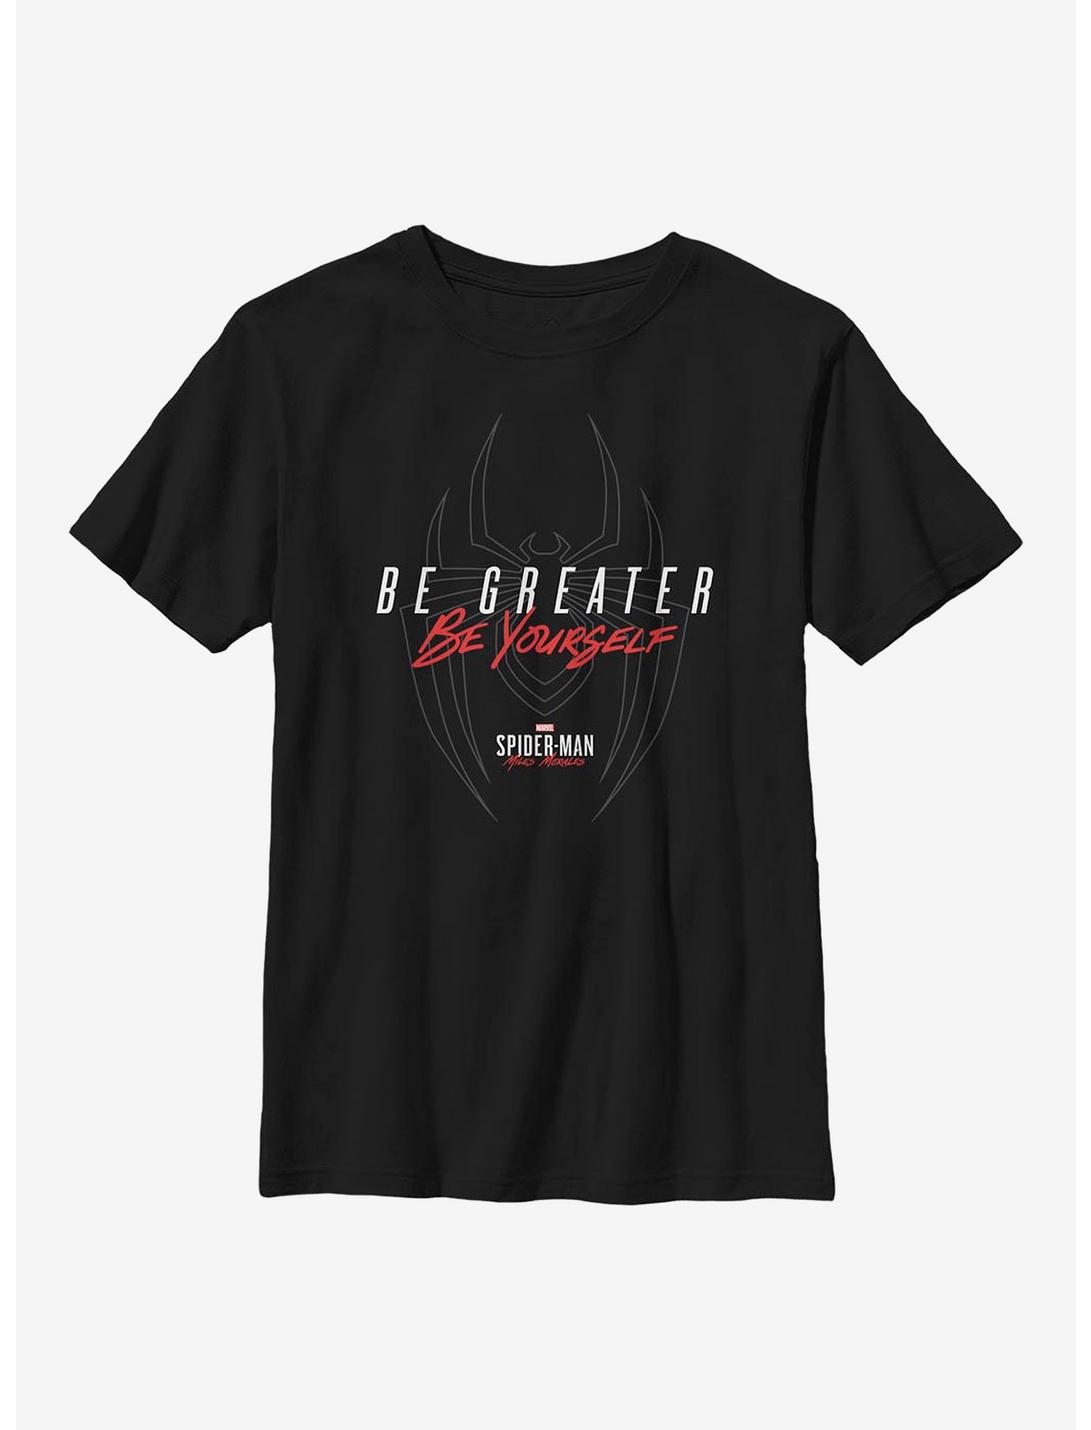 Marvel Spider-Man Be Greater Be Yourself Youth T-Shirt, BLACK, hi-res